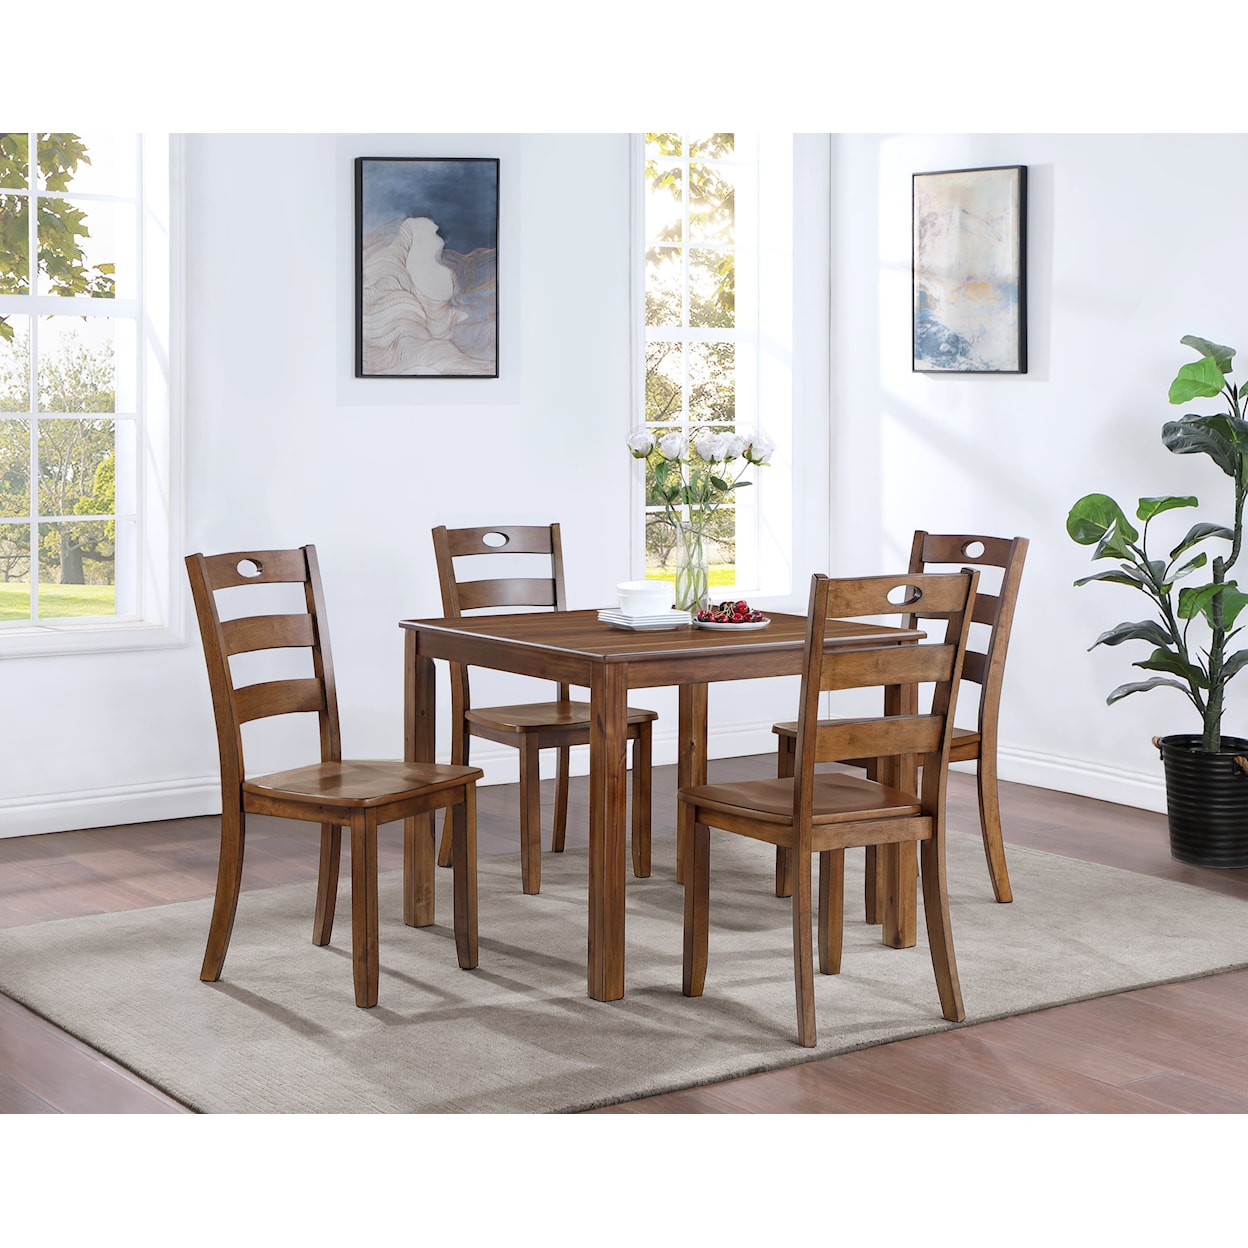 New Classic Furniture Salem Dining Chair